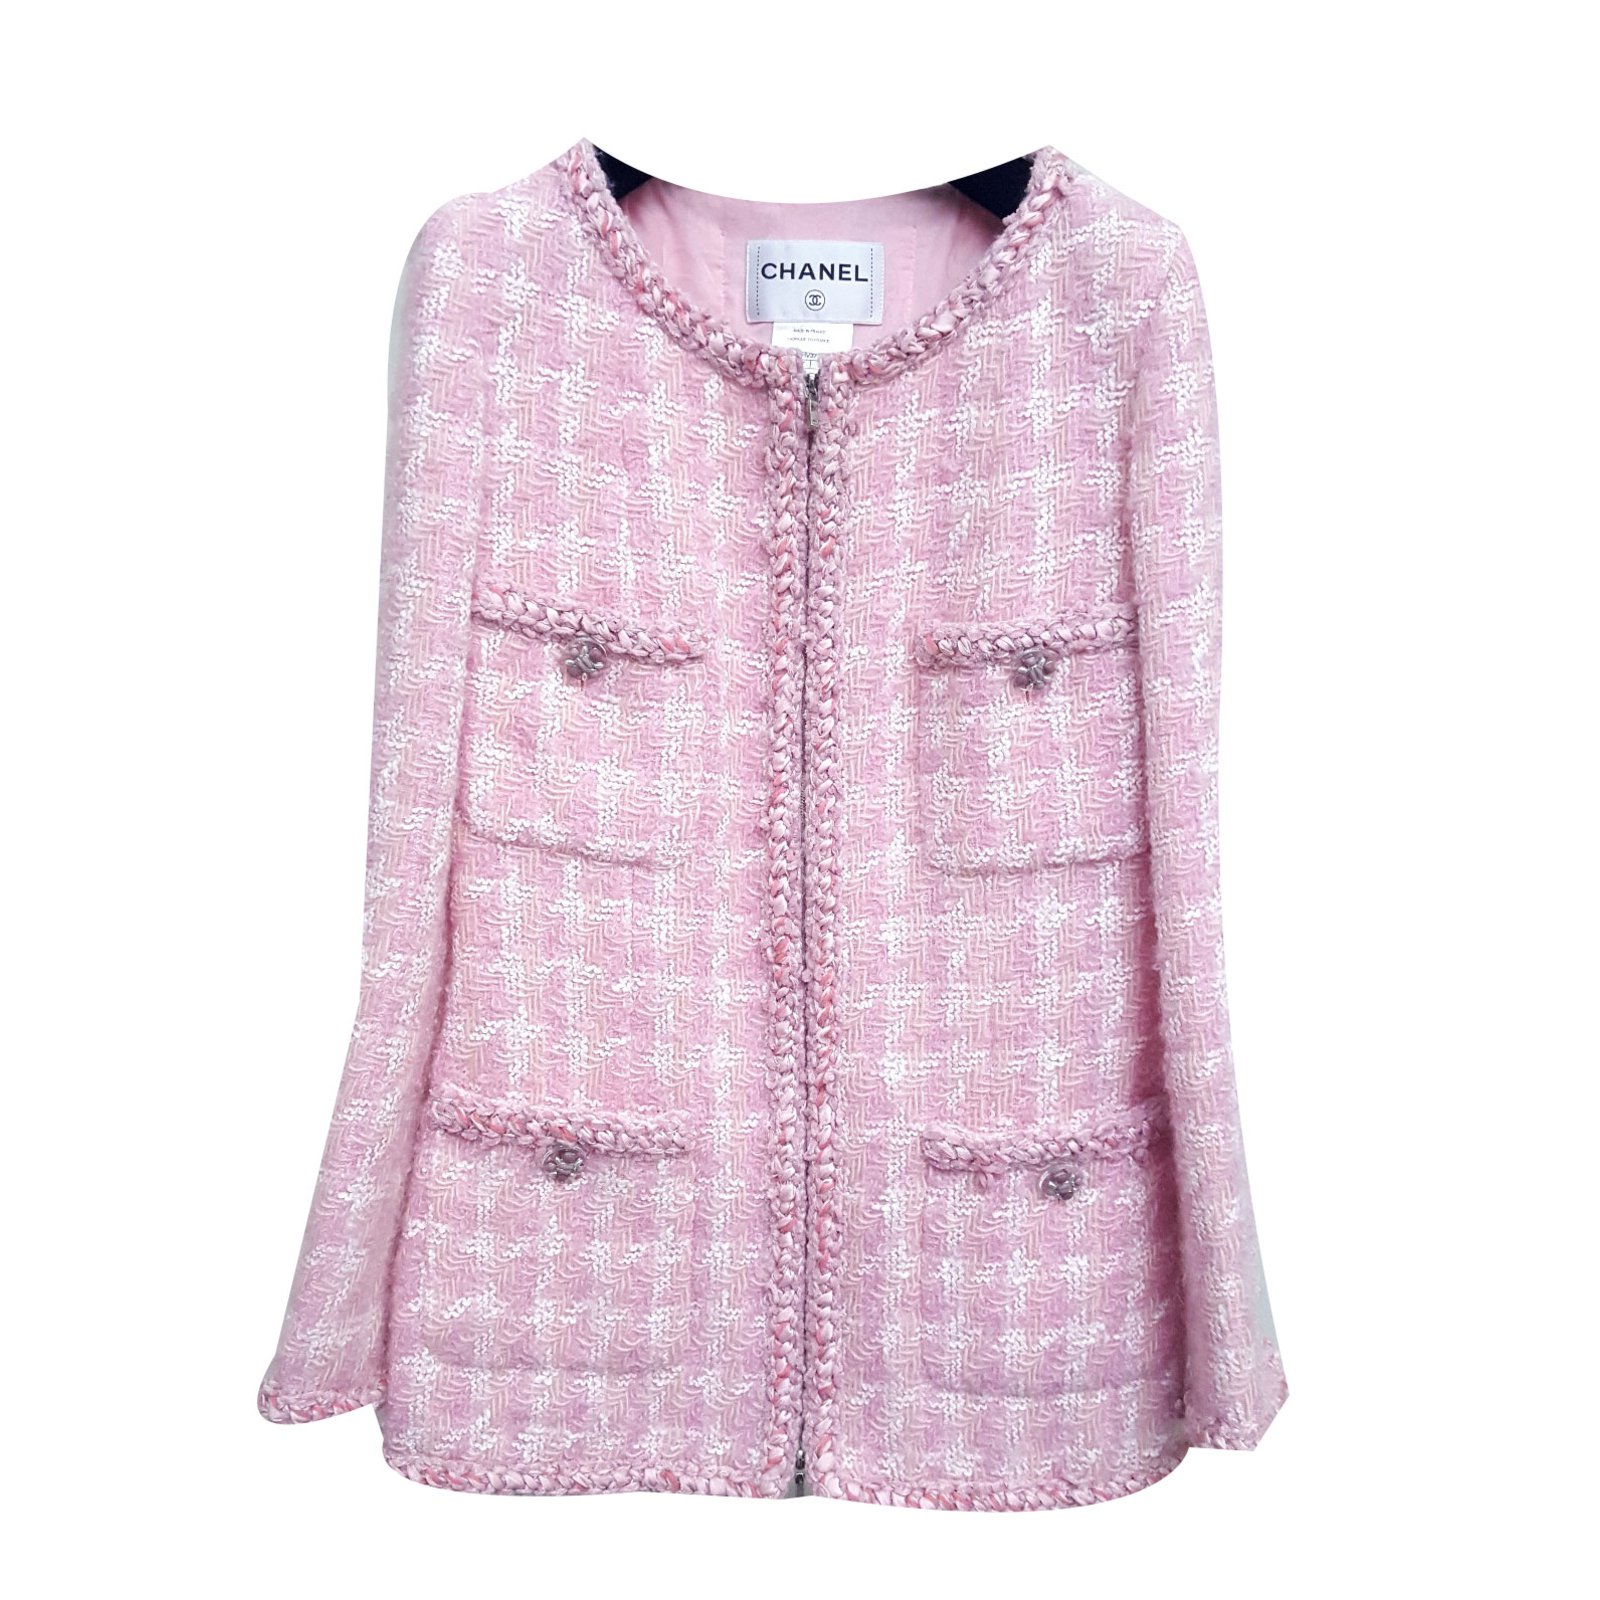 Chanel 2019 Jacket - 30 For Sale on 1stDibs  chanel pink jacket 2019,  chanel black bomber jacket, chanel jacket 2019